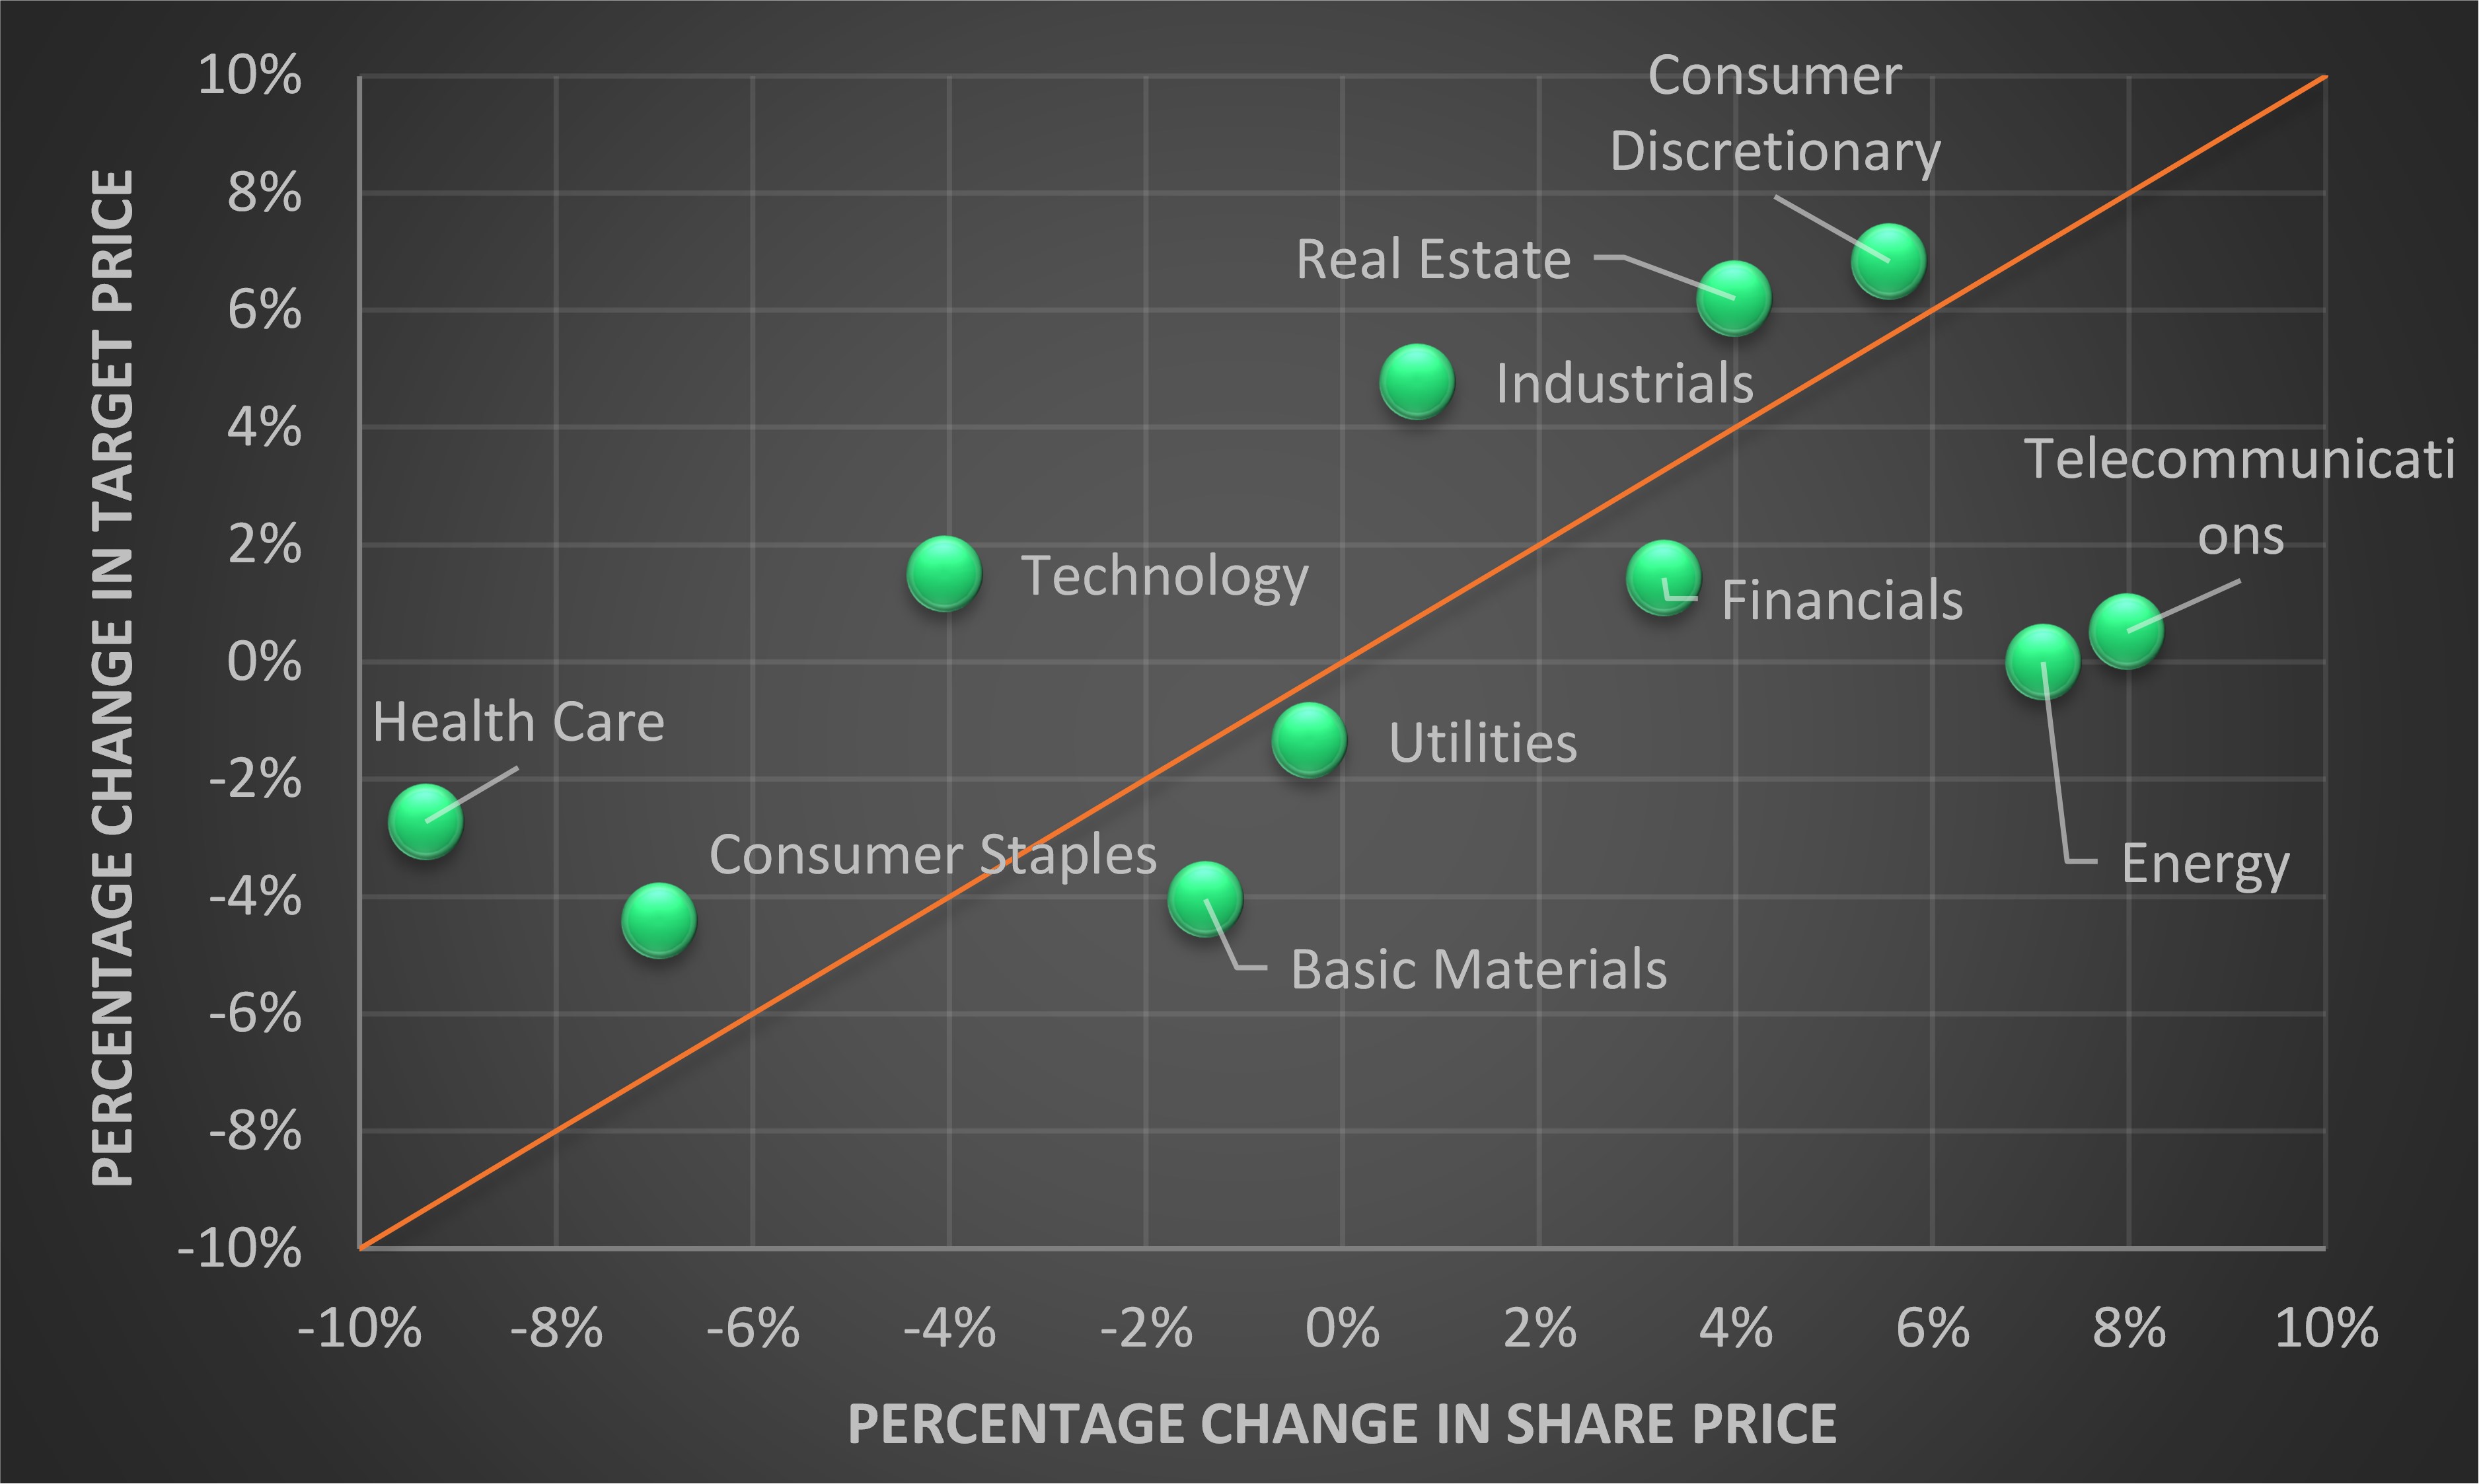 Figure 1. Share price change and target price change by industry